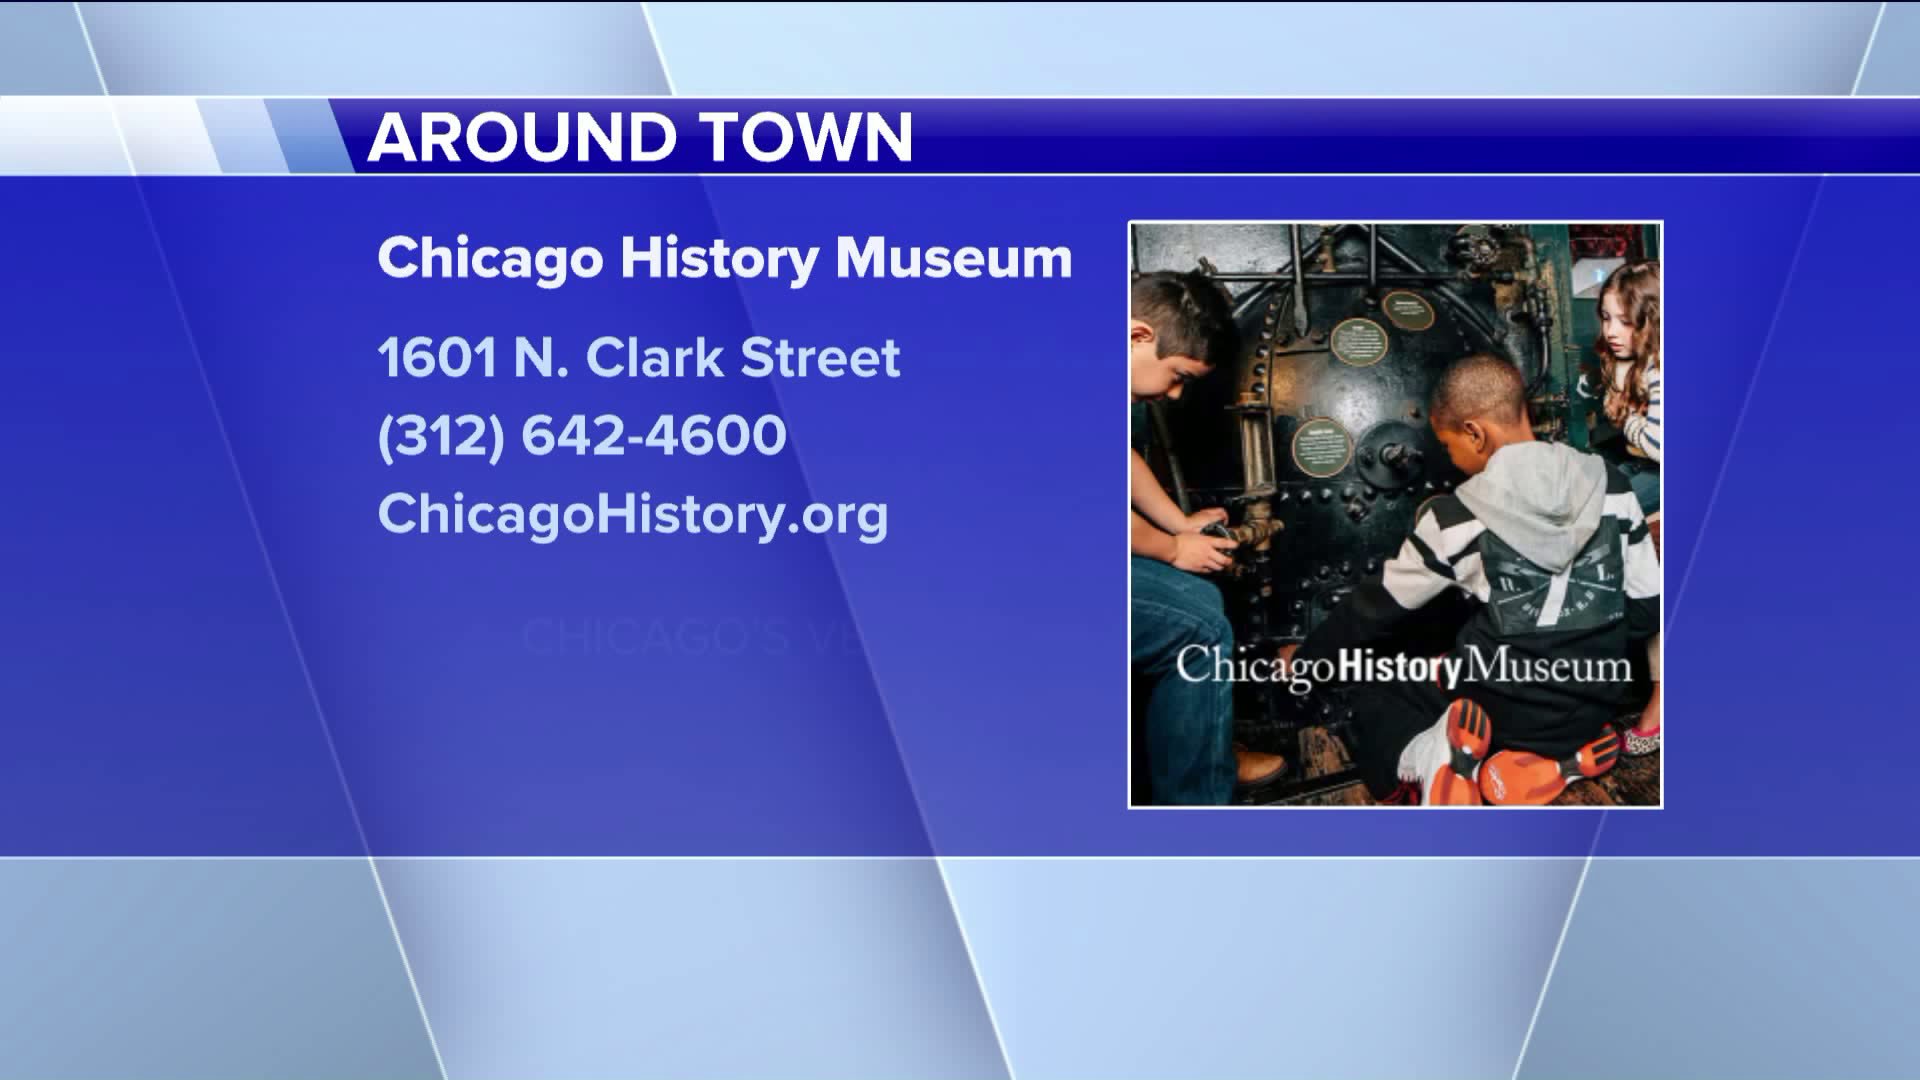 Around Town Check out the Chicago History Museum